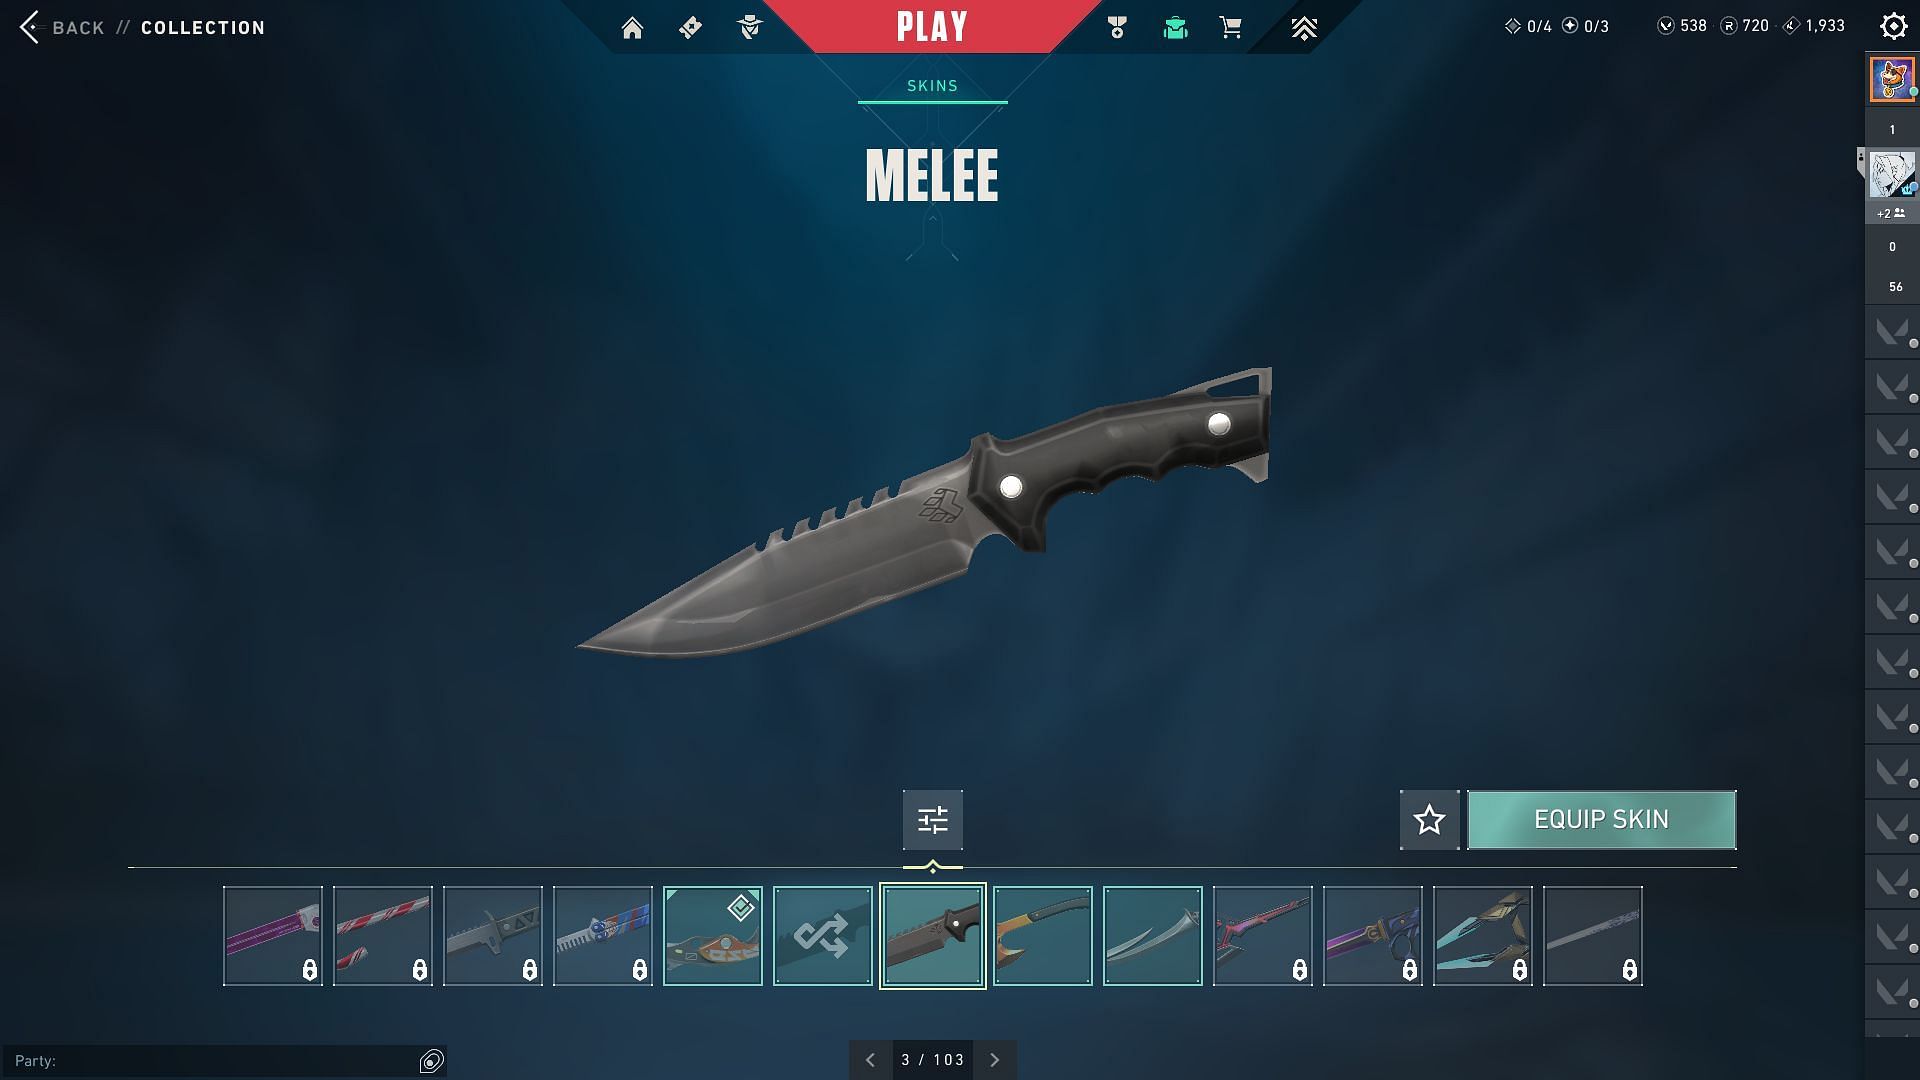 The weapon, Melee (Image via Riot Games)